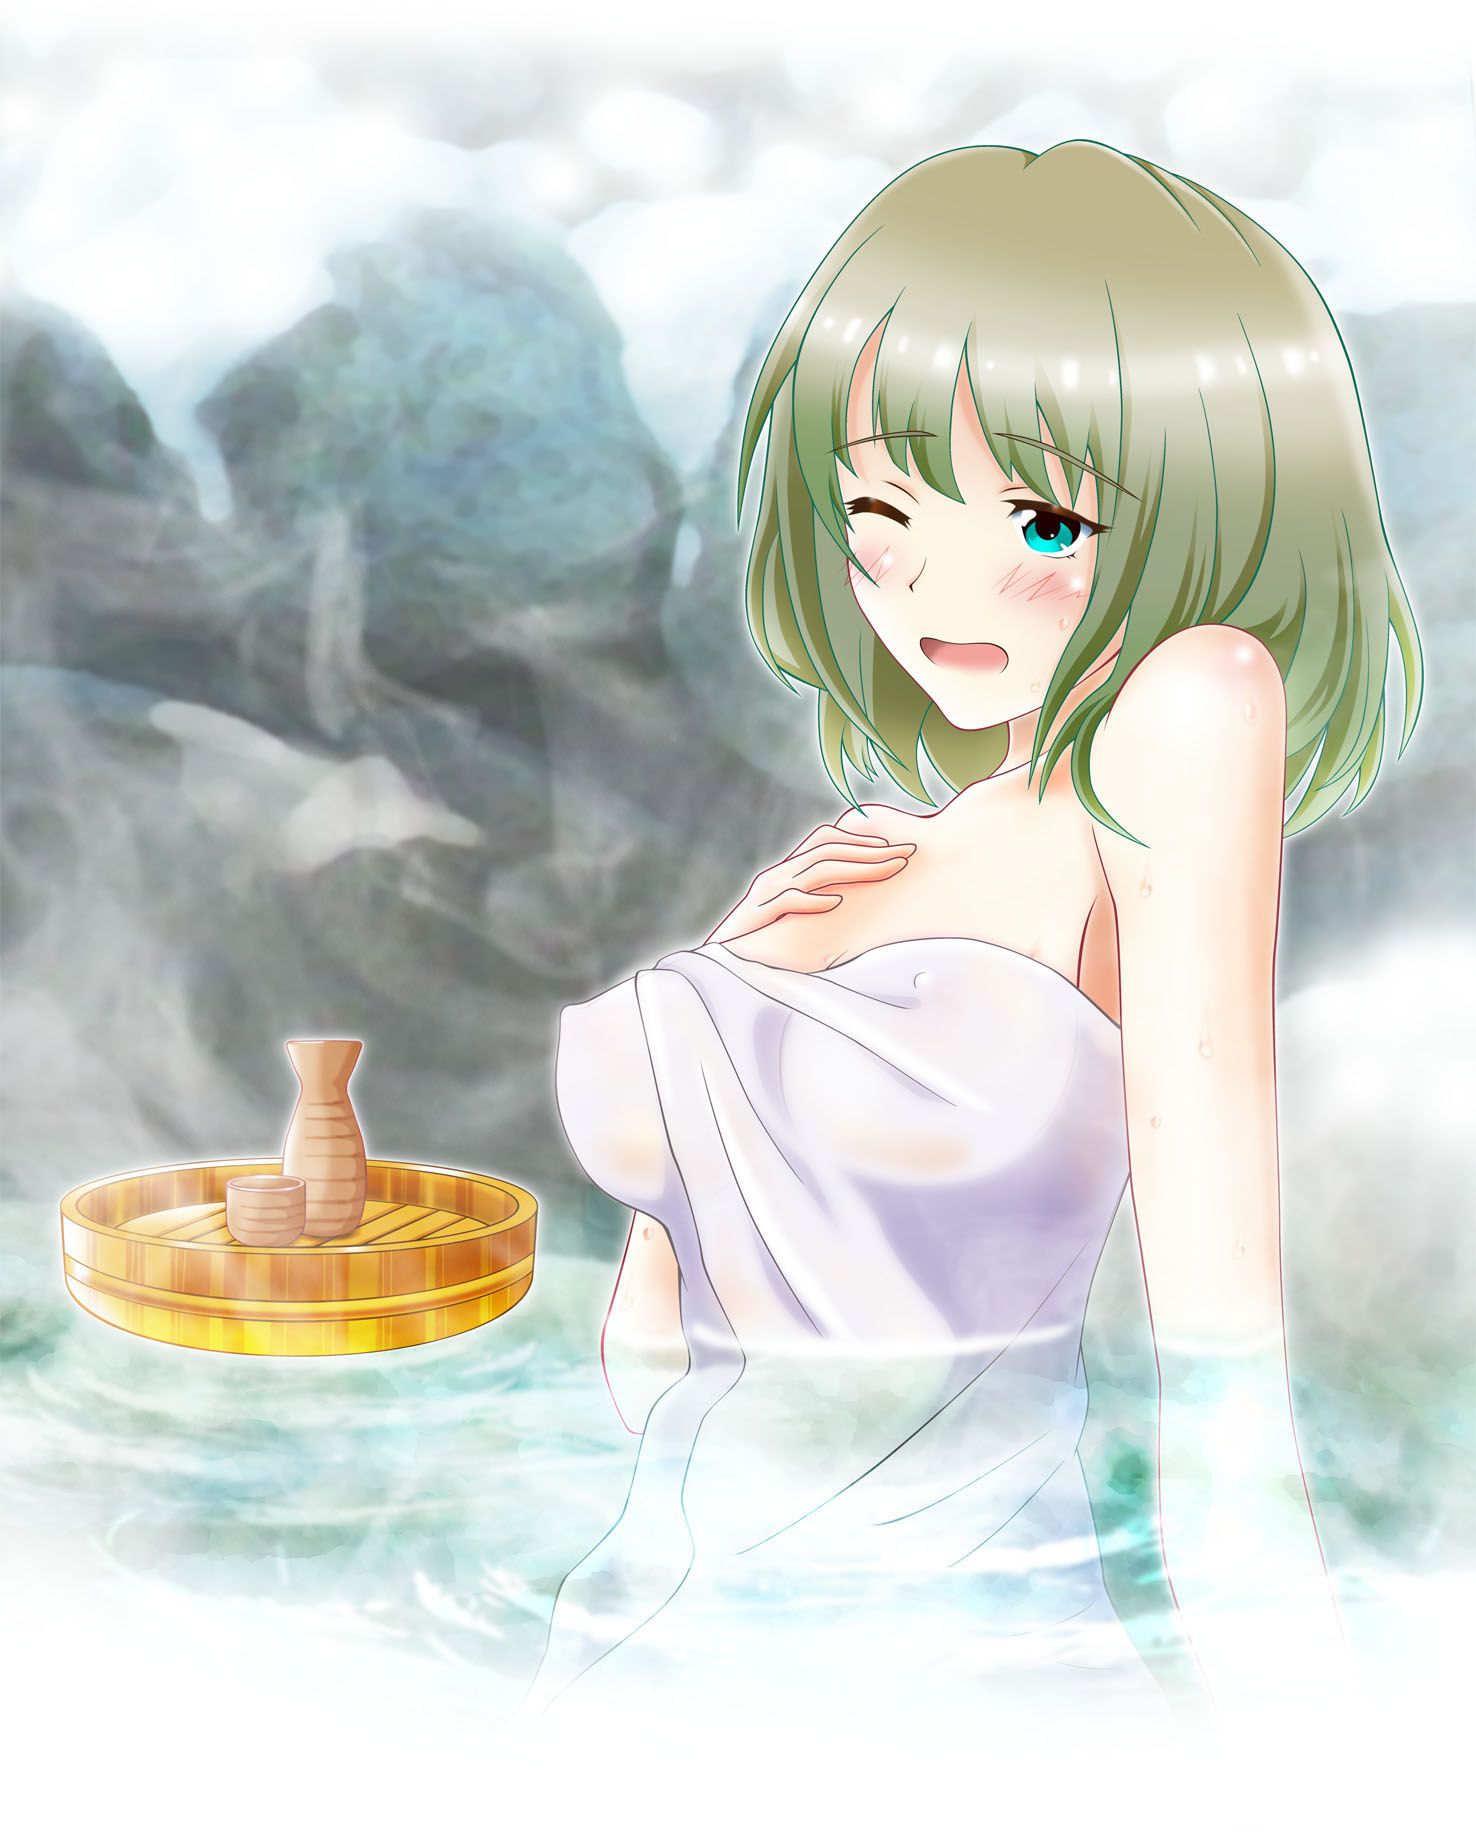 TAKAGAKI Kaede (deremas) and hot springs that expedite the delusion in erotic images. 18